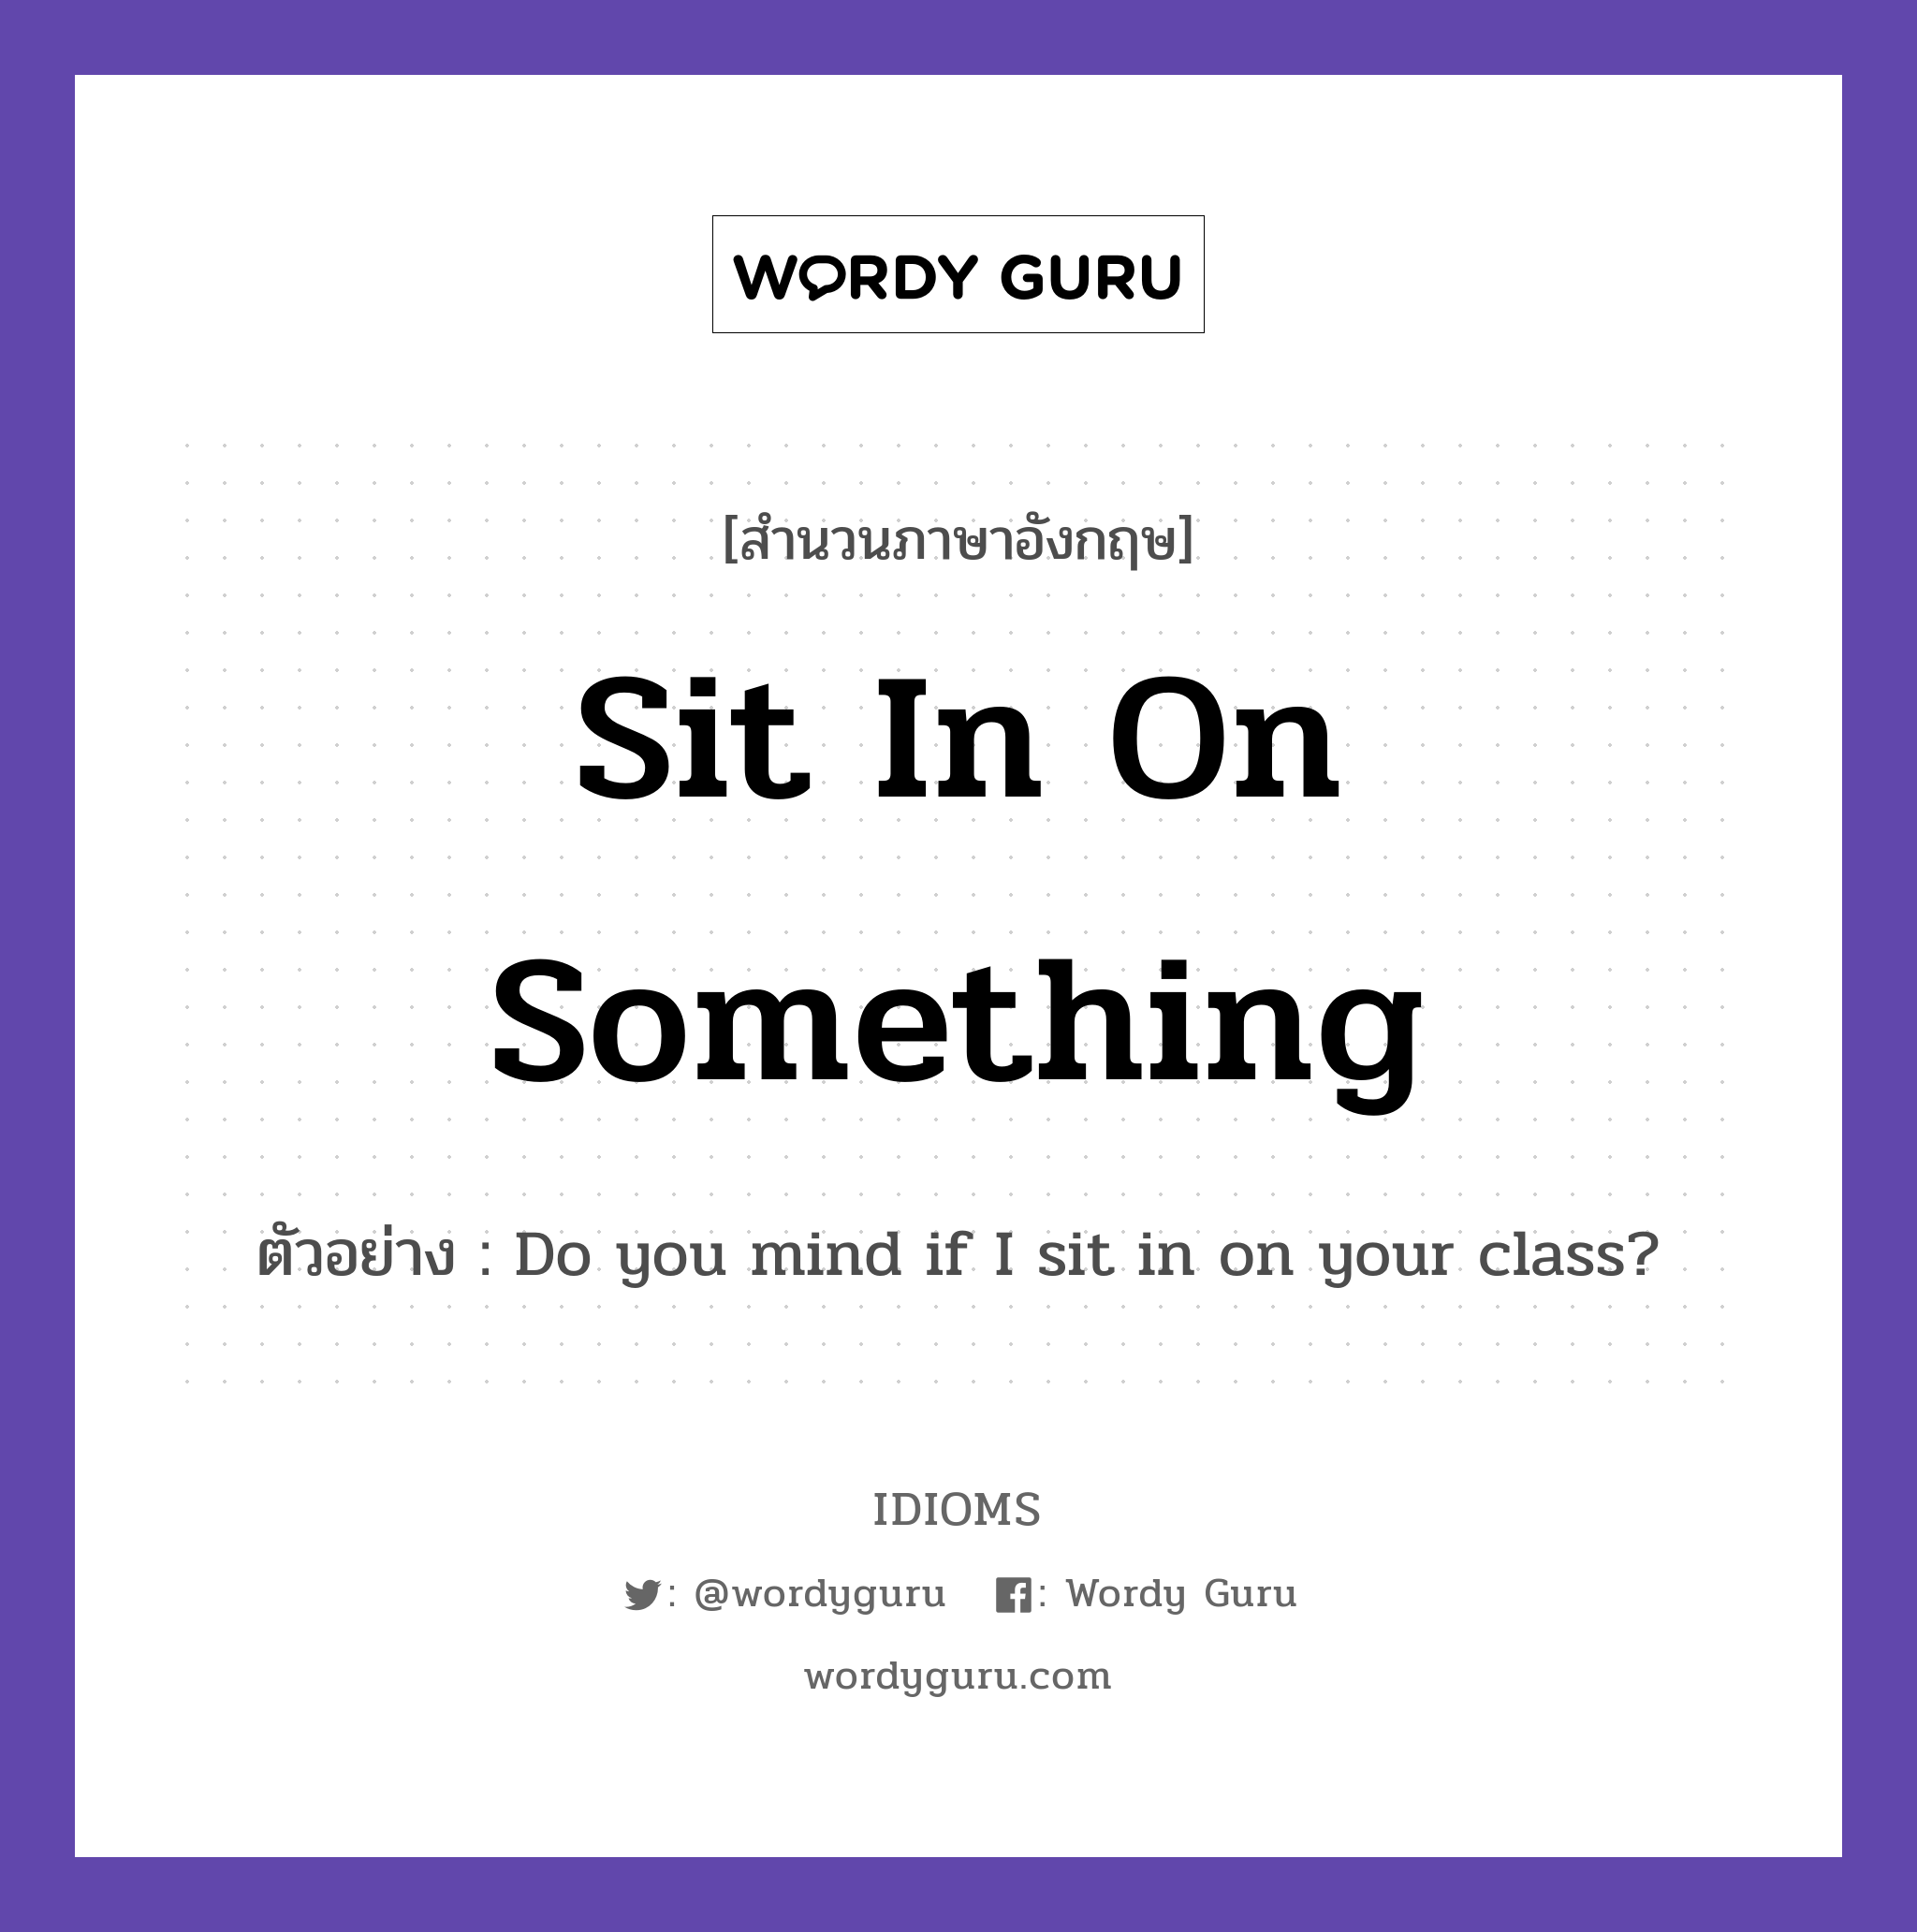 Sit In On Something แปลว่า?, สำนวนภาษาอังกฤษ Sit In On Something ตัวอย่าง Do you mind if I sit in on your class?